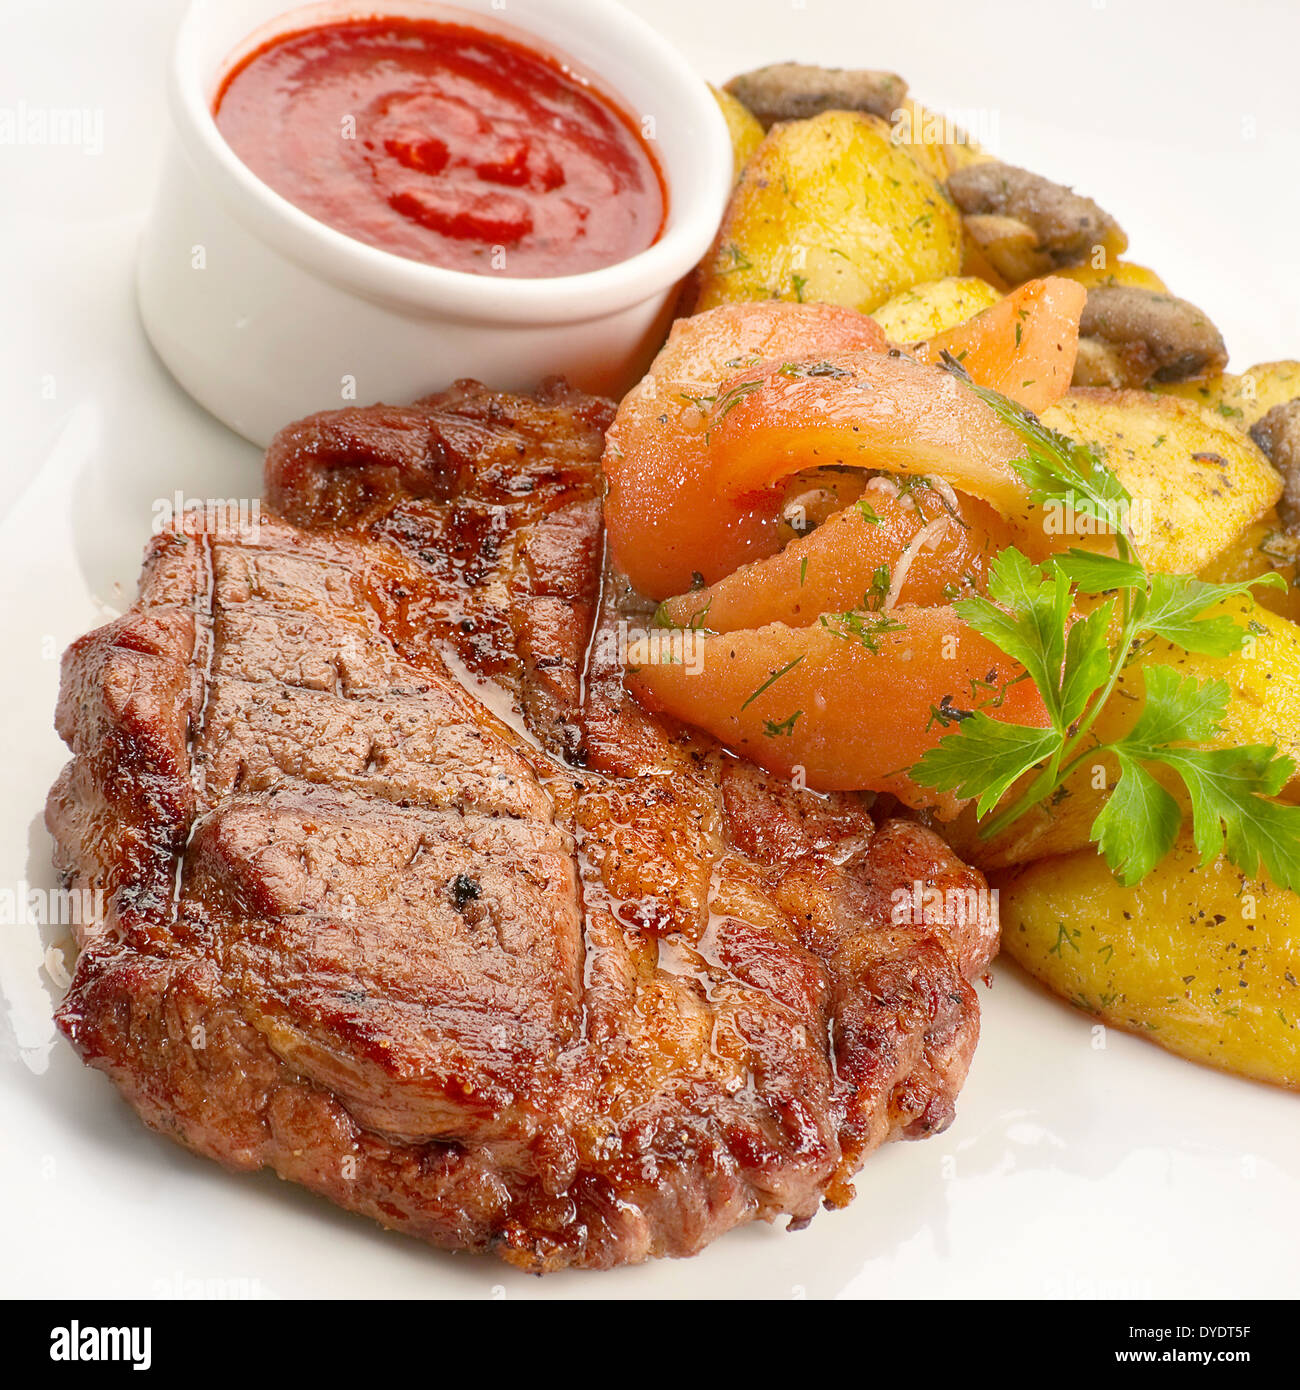 Fried veal steak with potato and sauce Stock Photo